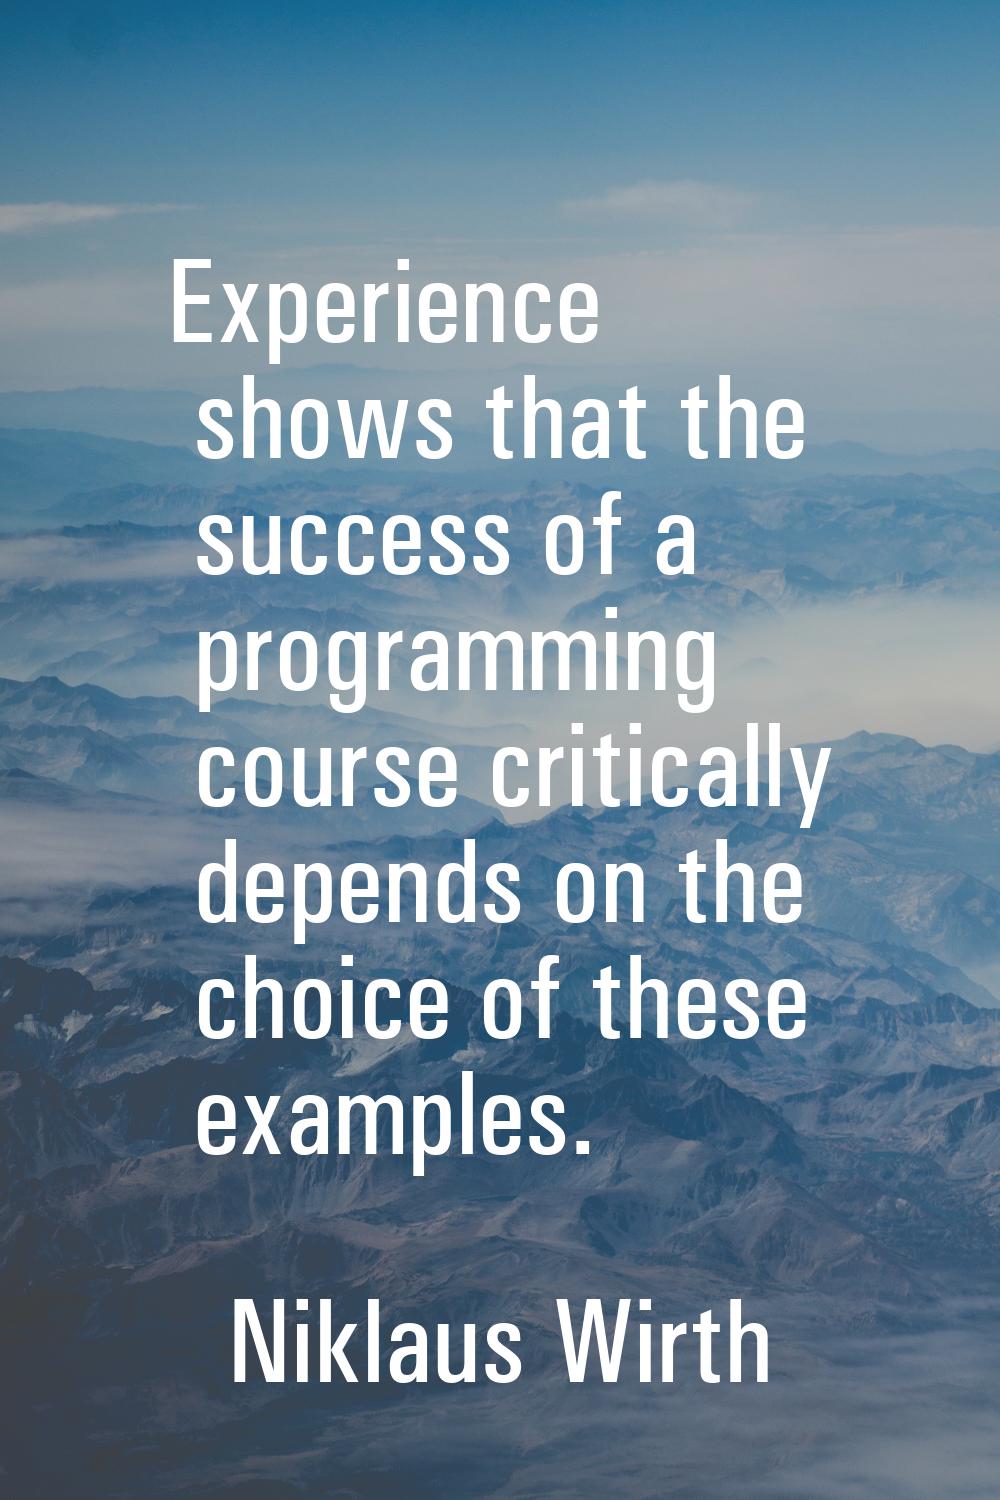 Experience shows that the success of a programming course critically depends on the choice of these